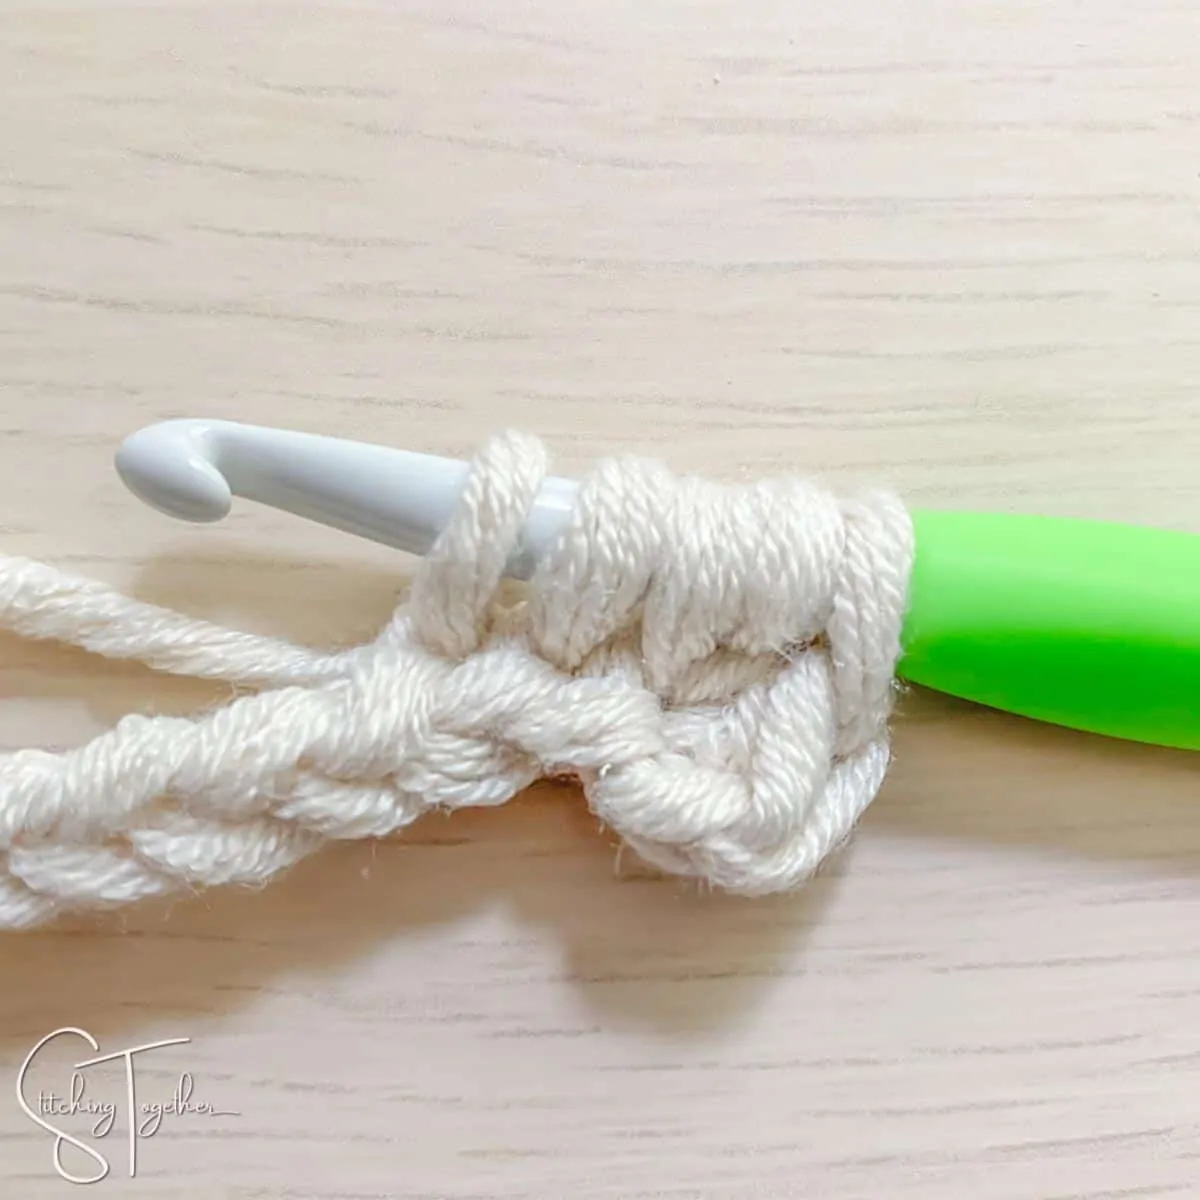 crochet hook and yarn showing the steps for a mhdc3tog